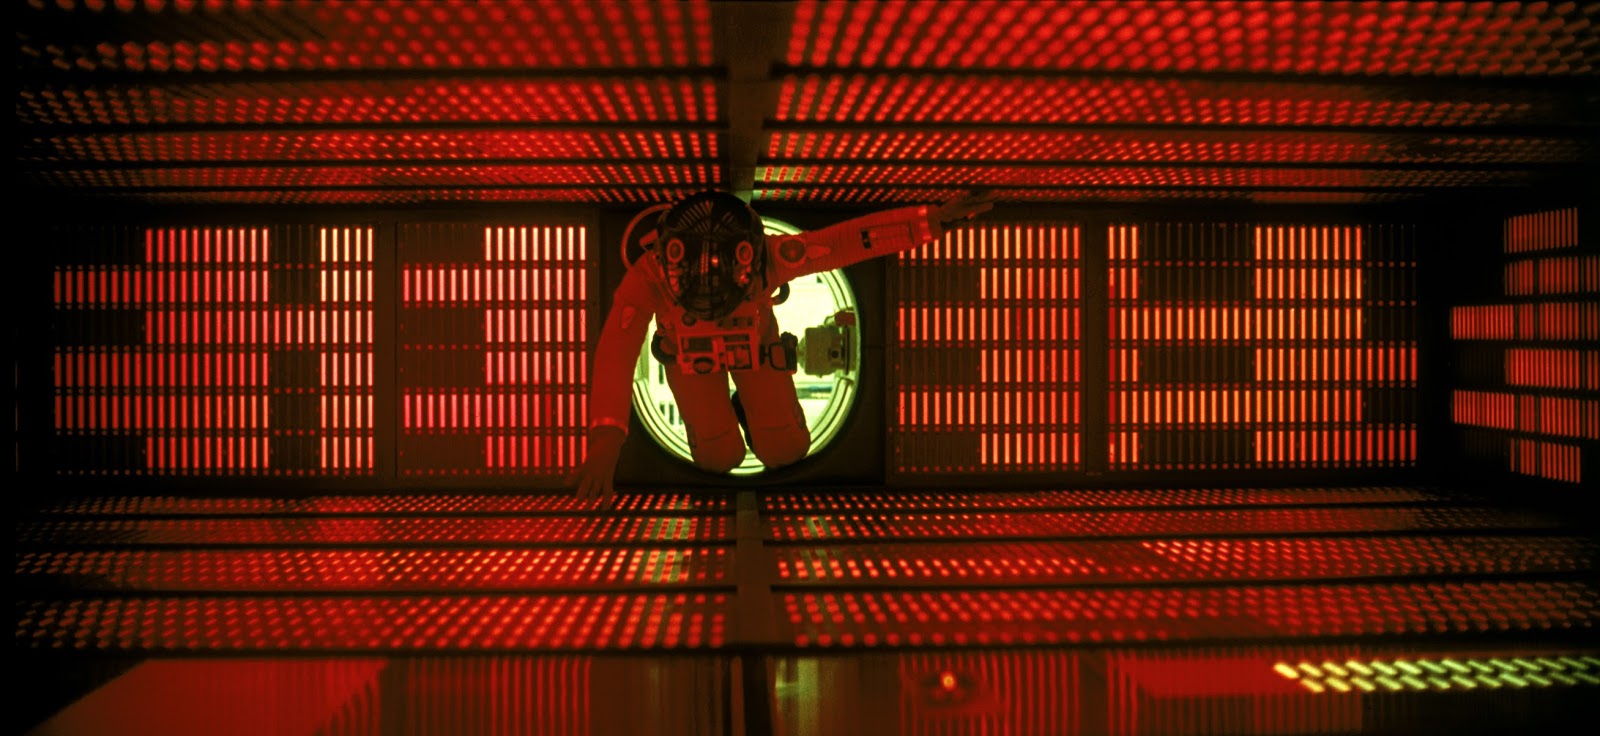 MOVIES ON THE BIG SCREEN: THE RETURN OF 2001: A SPACE ODYSSEY IN 70MM!